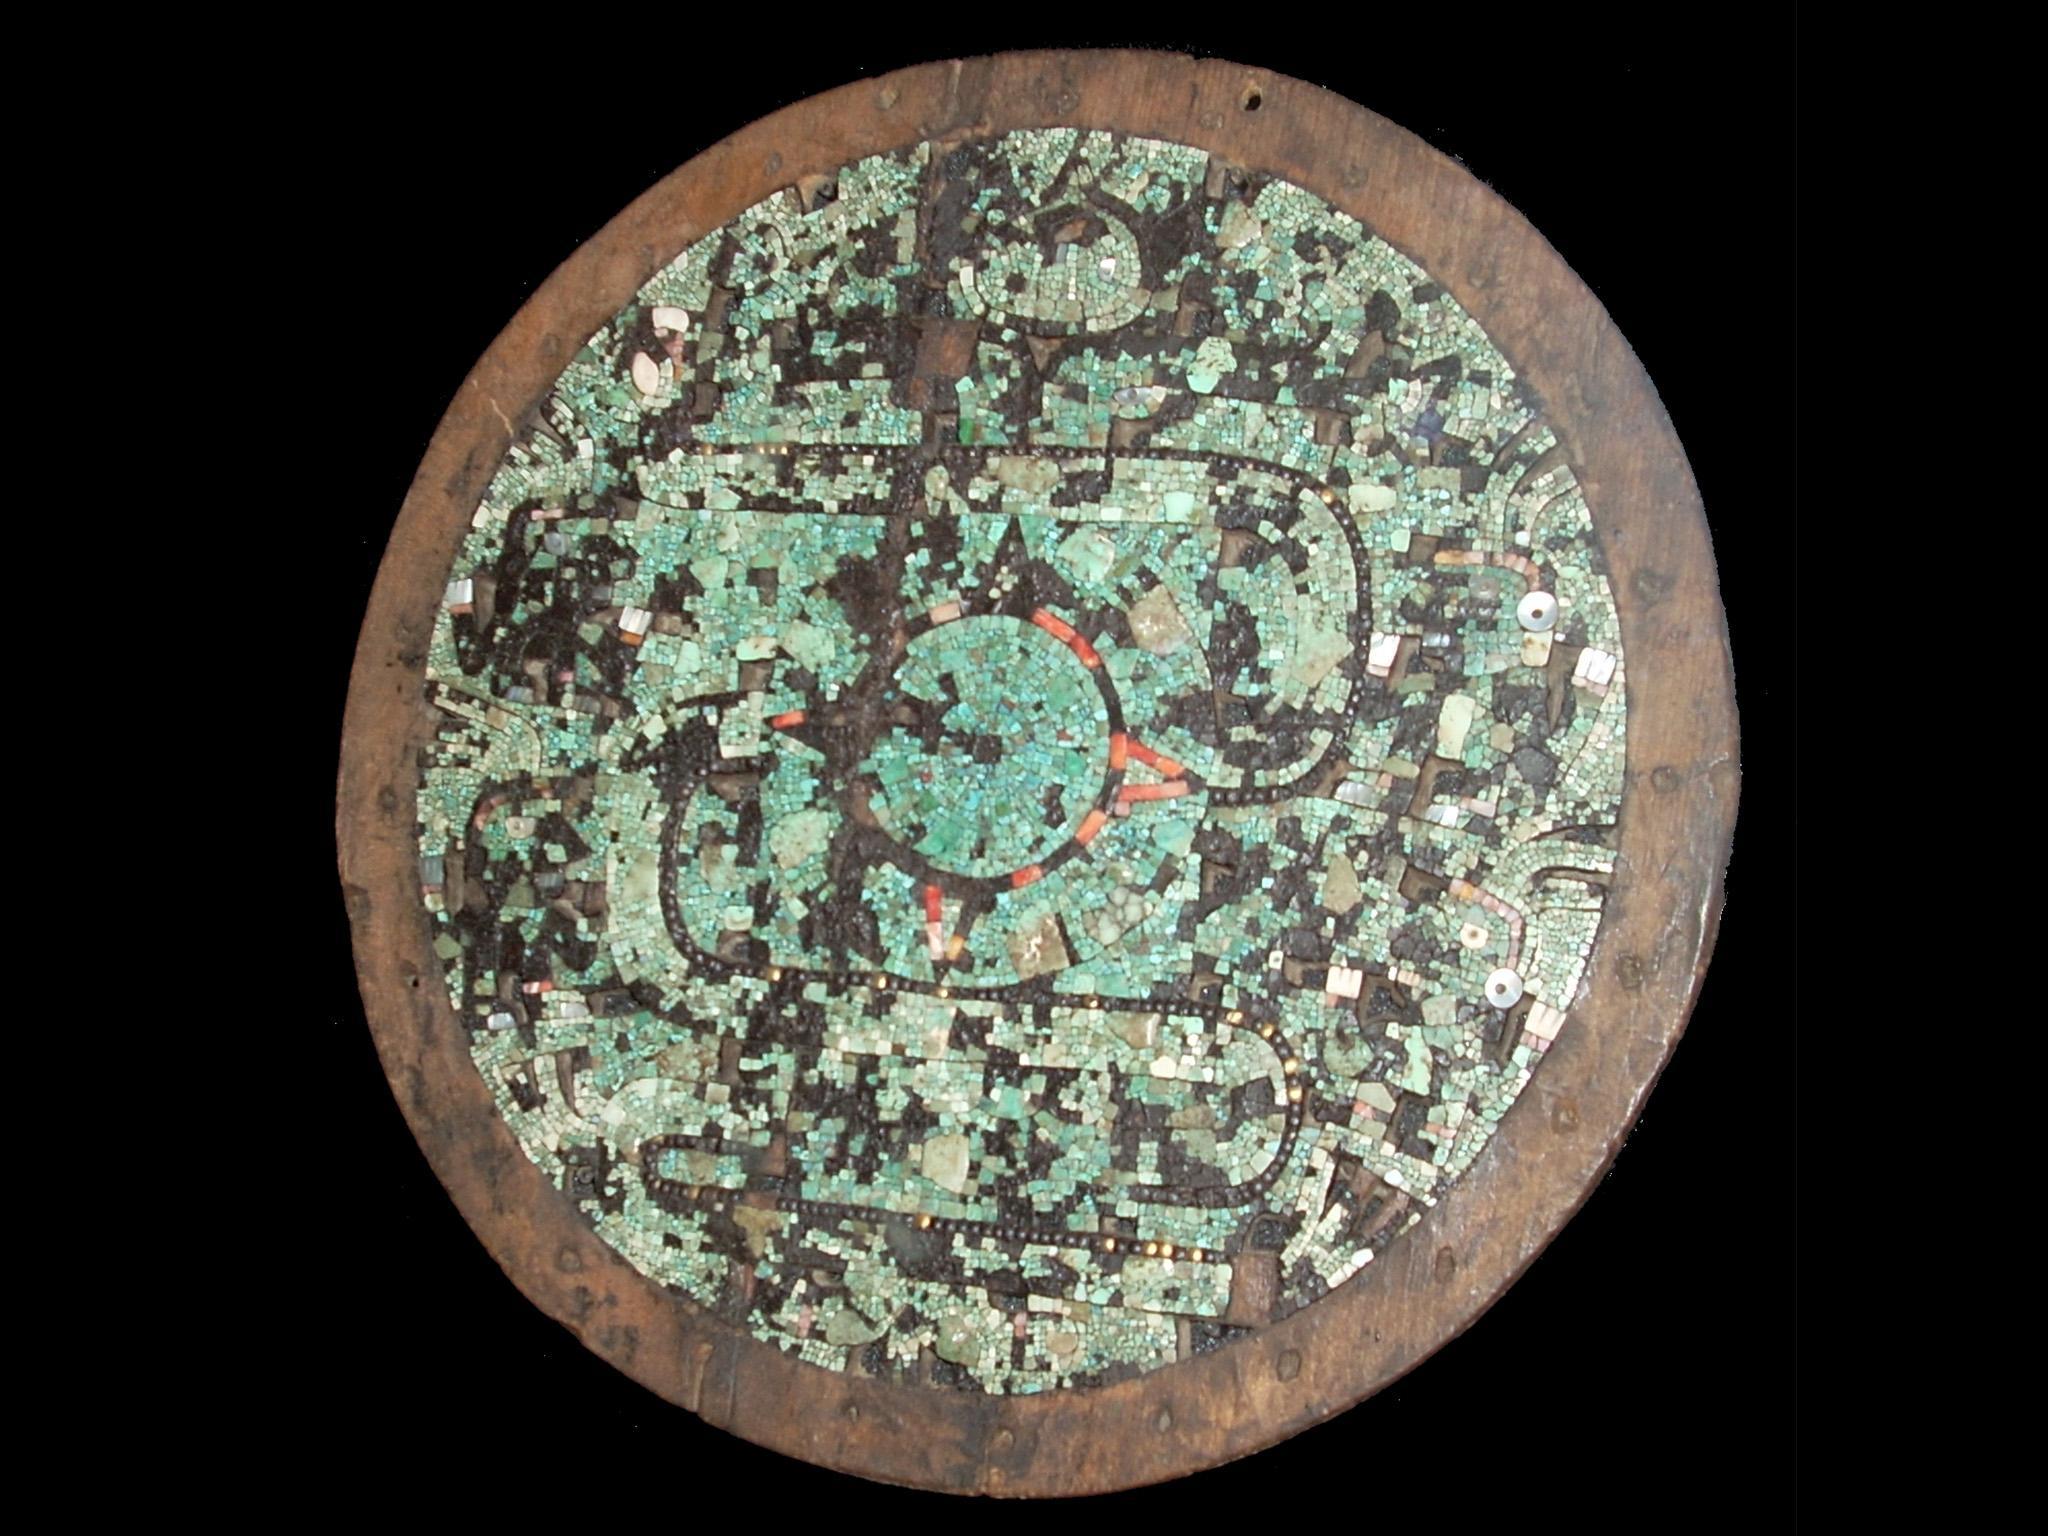 An Aztec or Mixtec ceremonial shield (circa 15th century) with mosaic decoration in the British Museum